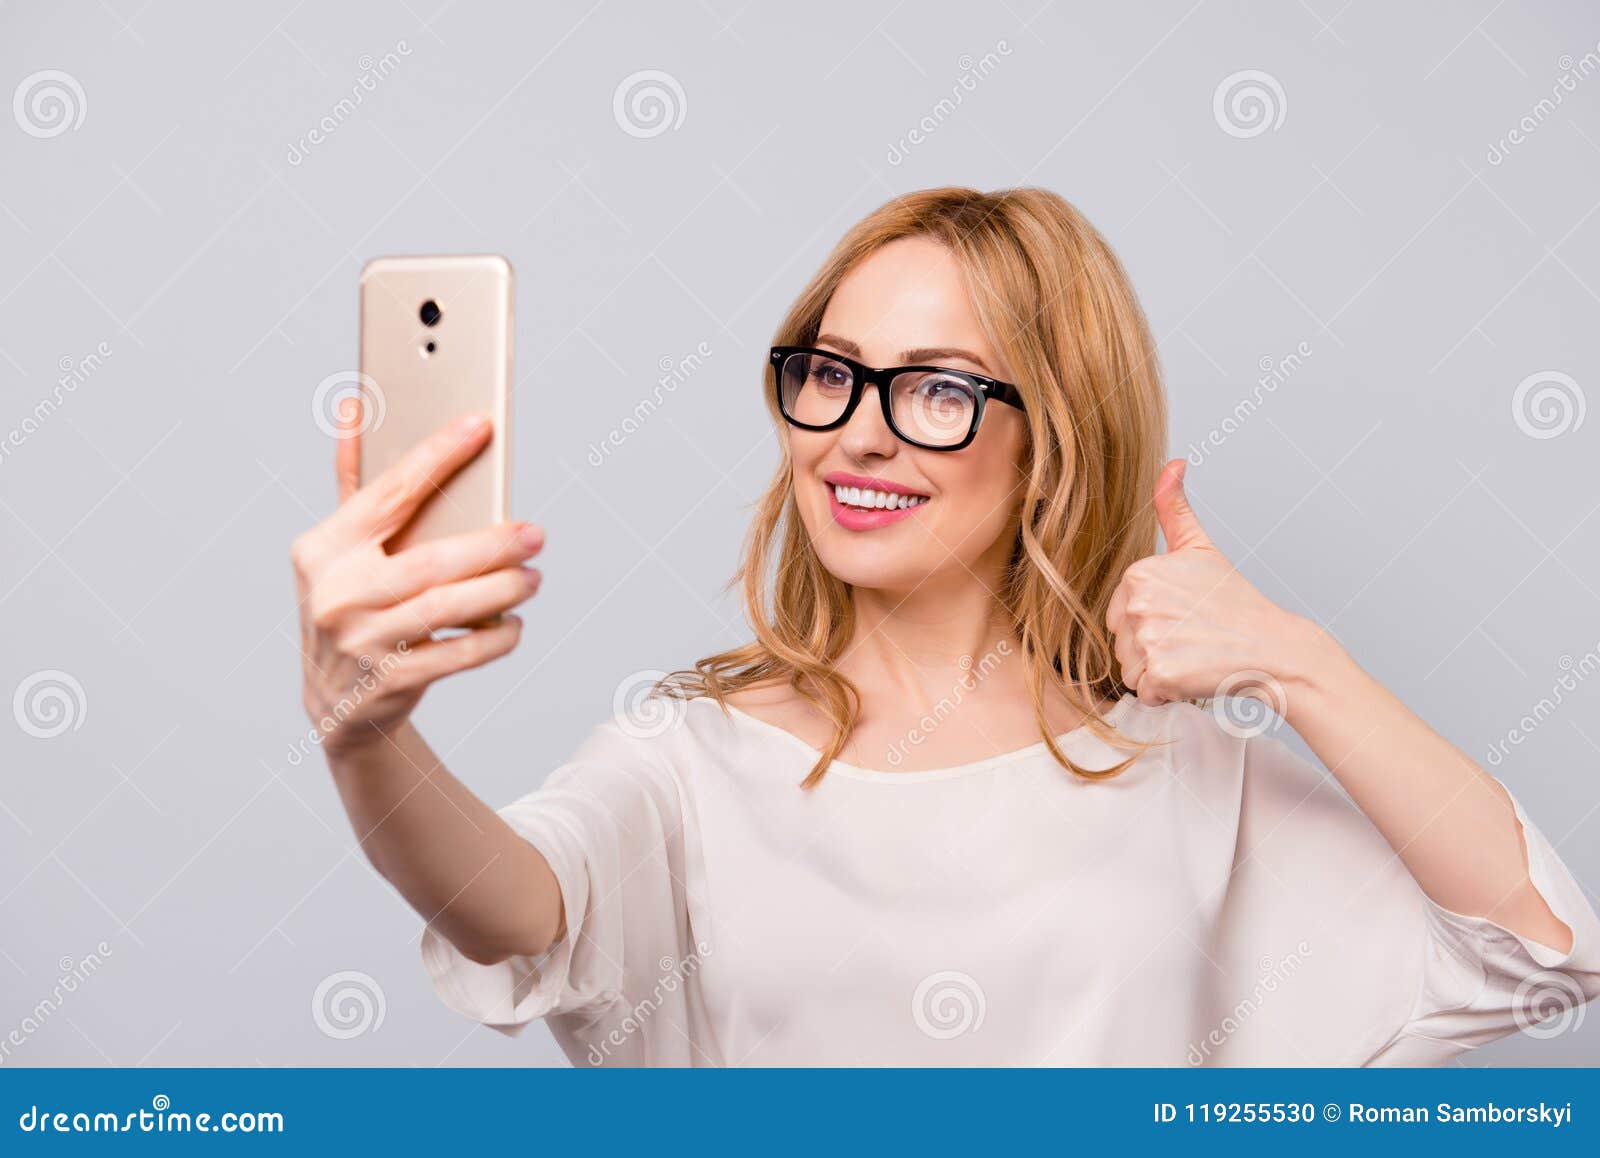 Pretty Smiling Woman With Blonde Hair In Spectacles Taking Selfie